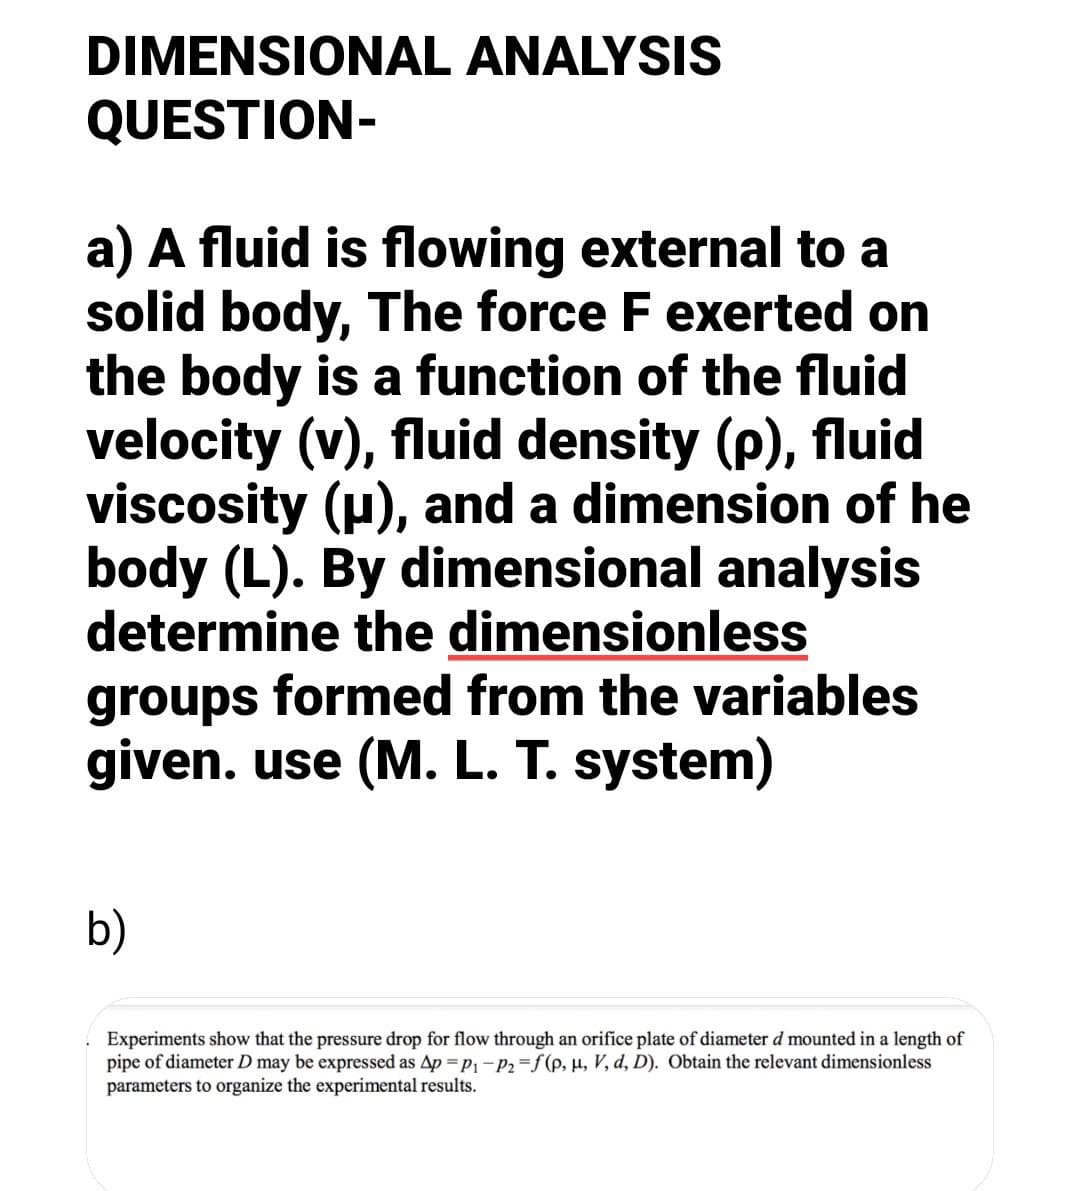 DIMENSIONAL ANALYSIS
QUESTION-
a) A fluid is flowing external to a
solid body, The force F exerted on
the body is a function of the fluid
velocity (v), fluid density (p), fluid
viscosity (u), and a dimension of he
body (L). By dimensional analysis
determine the dimensionless
groups formed from the variables
given. use (M. L. T. system)
b)
Experiments show that the pressure drop for flow through an orifice plate of diameter d mounted in a length of
pipe of diameter D may be expressed as Ap =p,-P2=f(p, µ, V, d, D). Obtain the relevant dimensionless
parameters to organize the experimental results.
